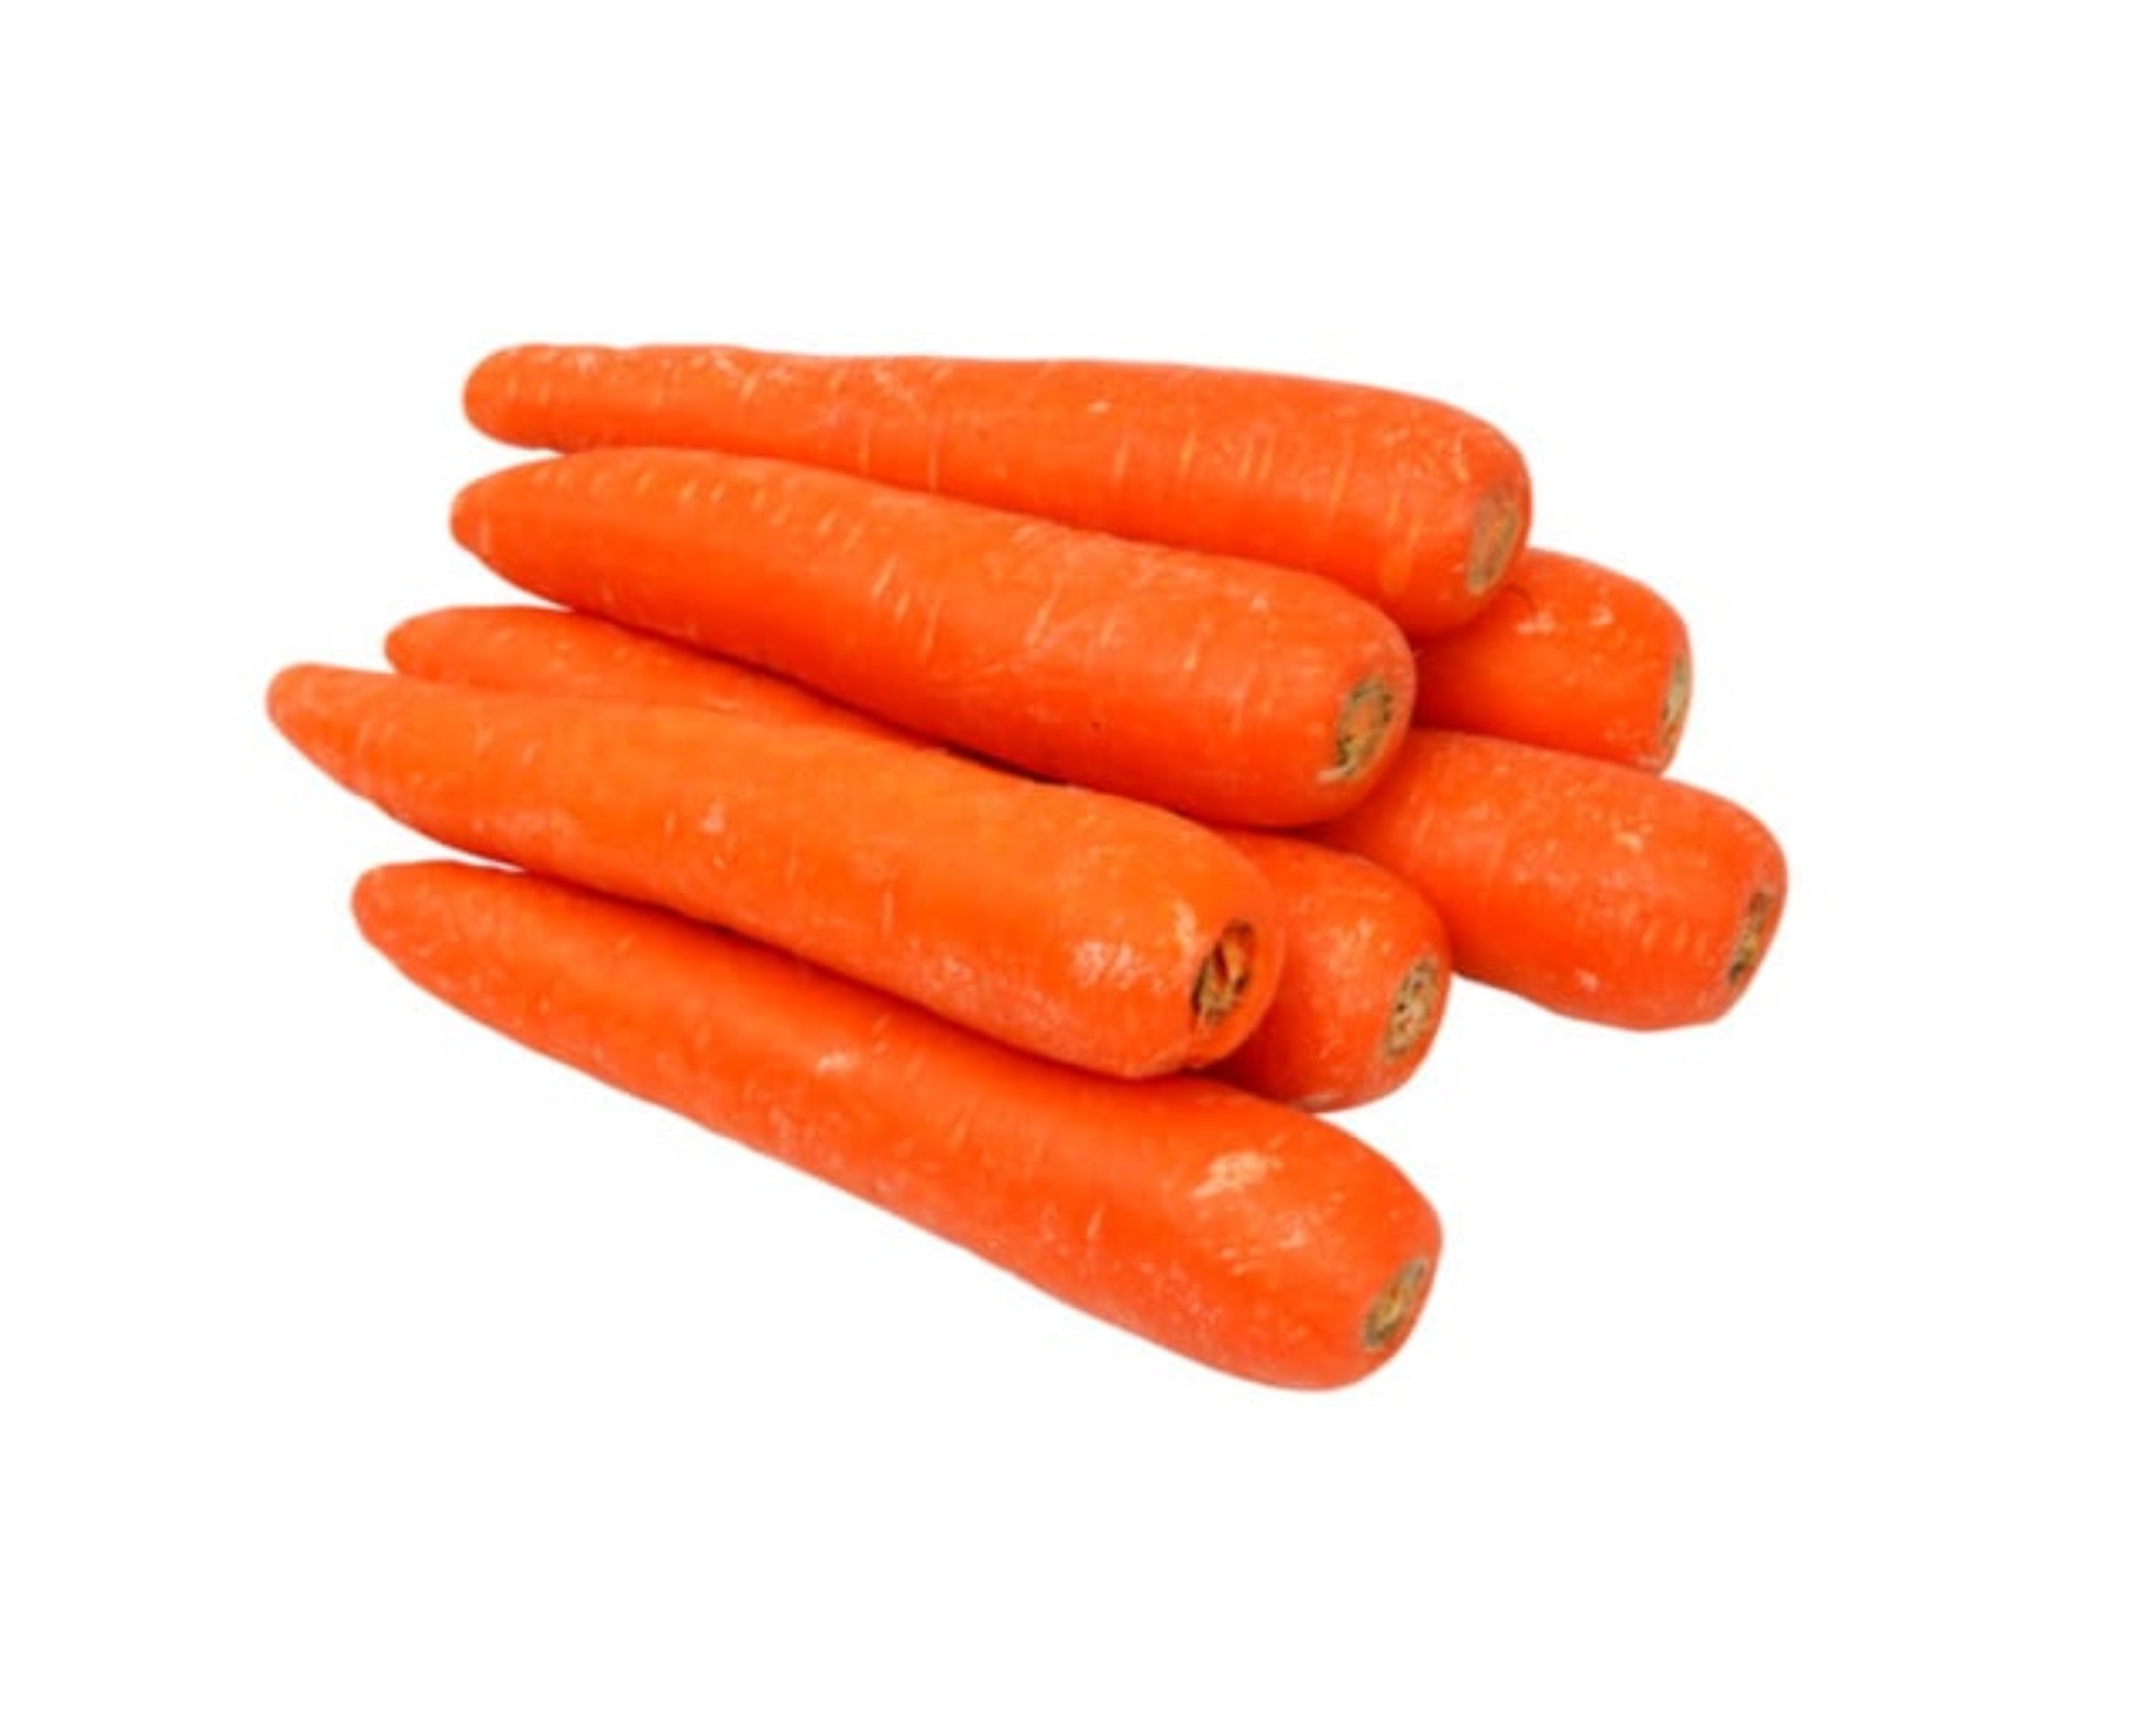 Imported Carrot 2.3KG